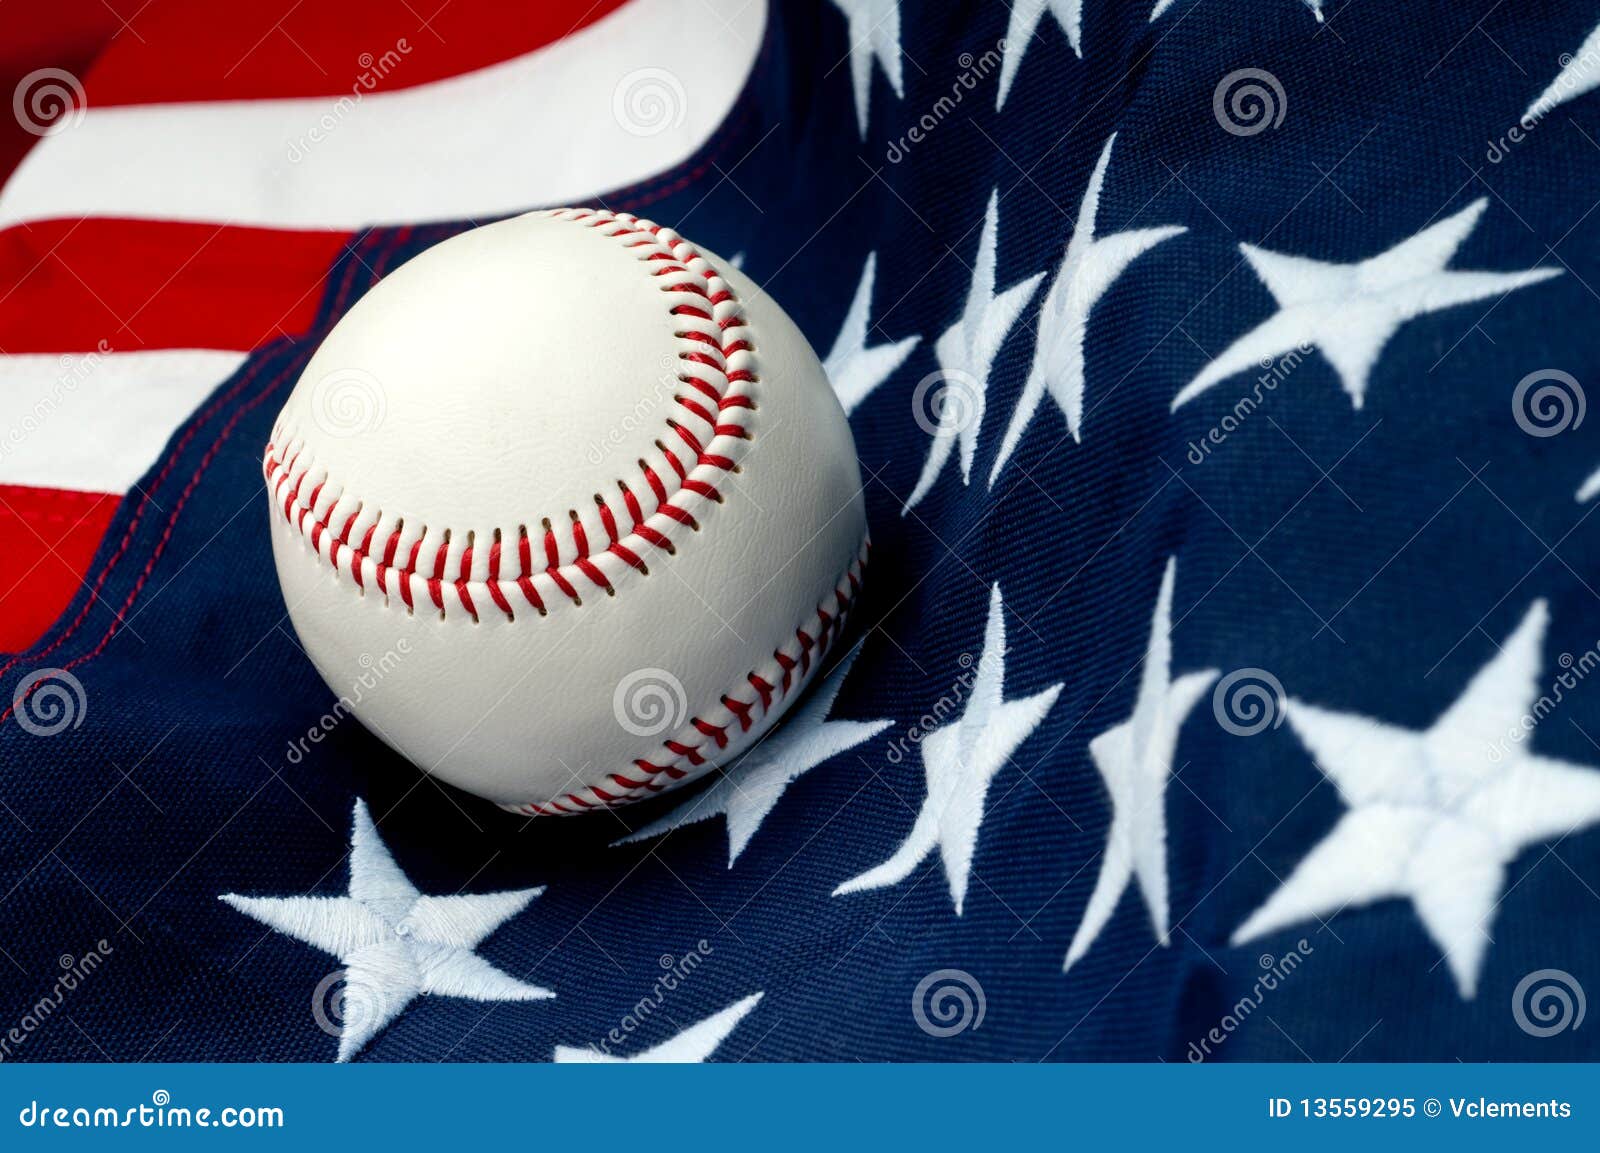 A Baseball On The American Flag Royalty Free Stock Photo - Image: 13559295